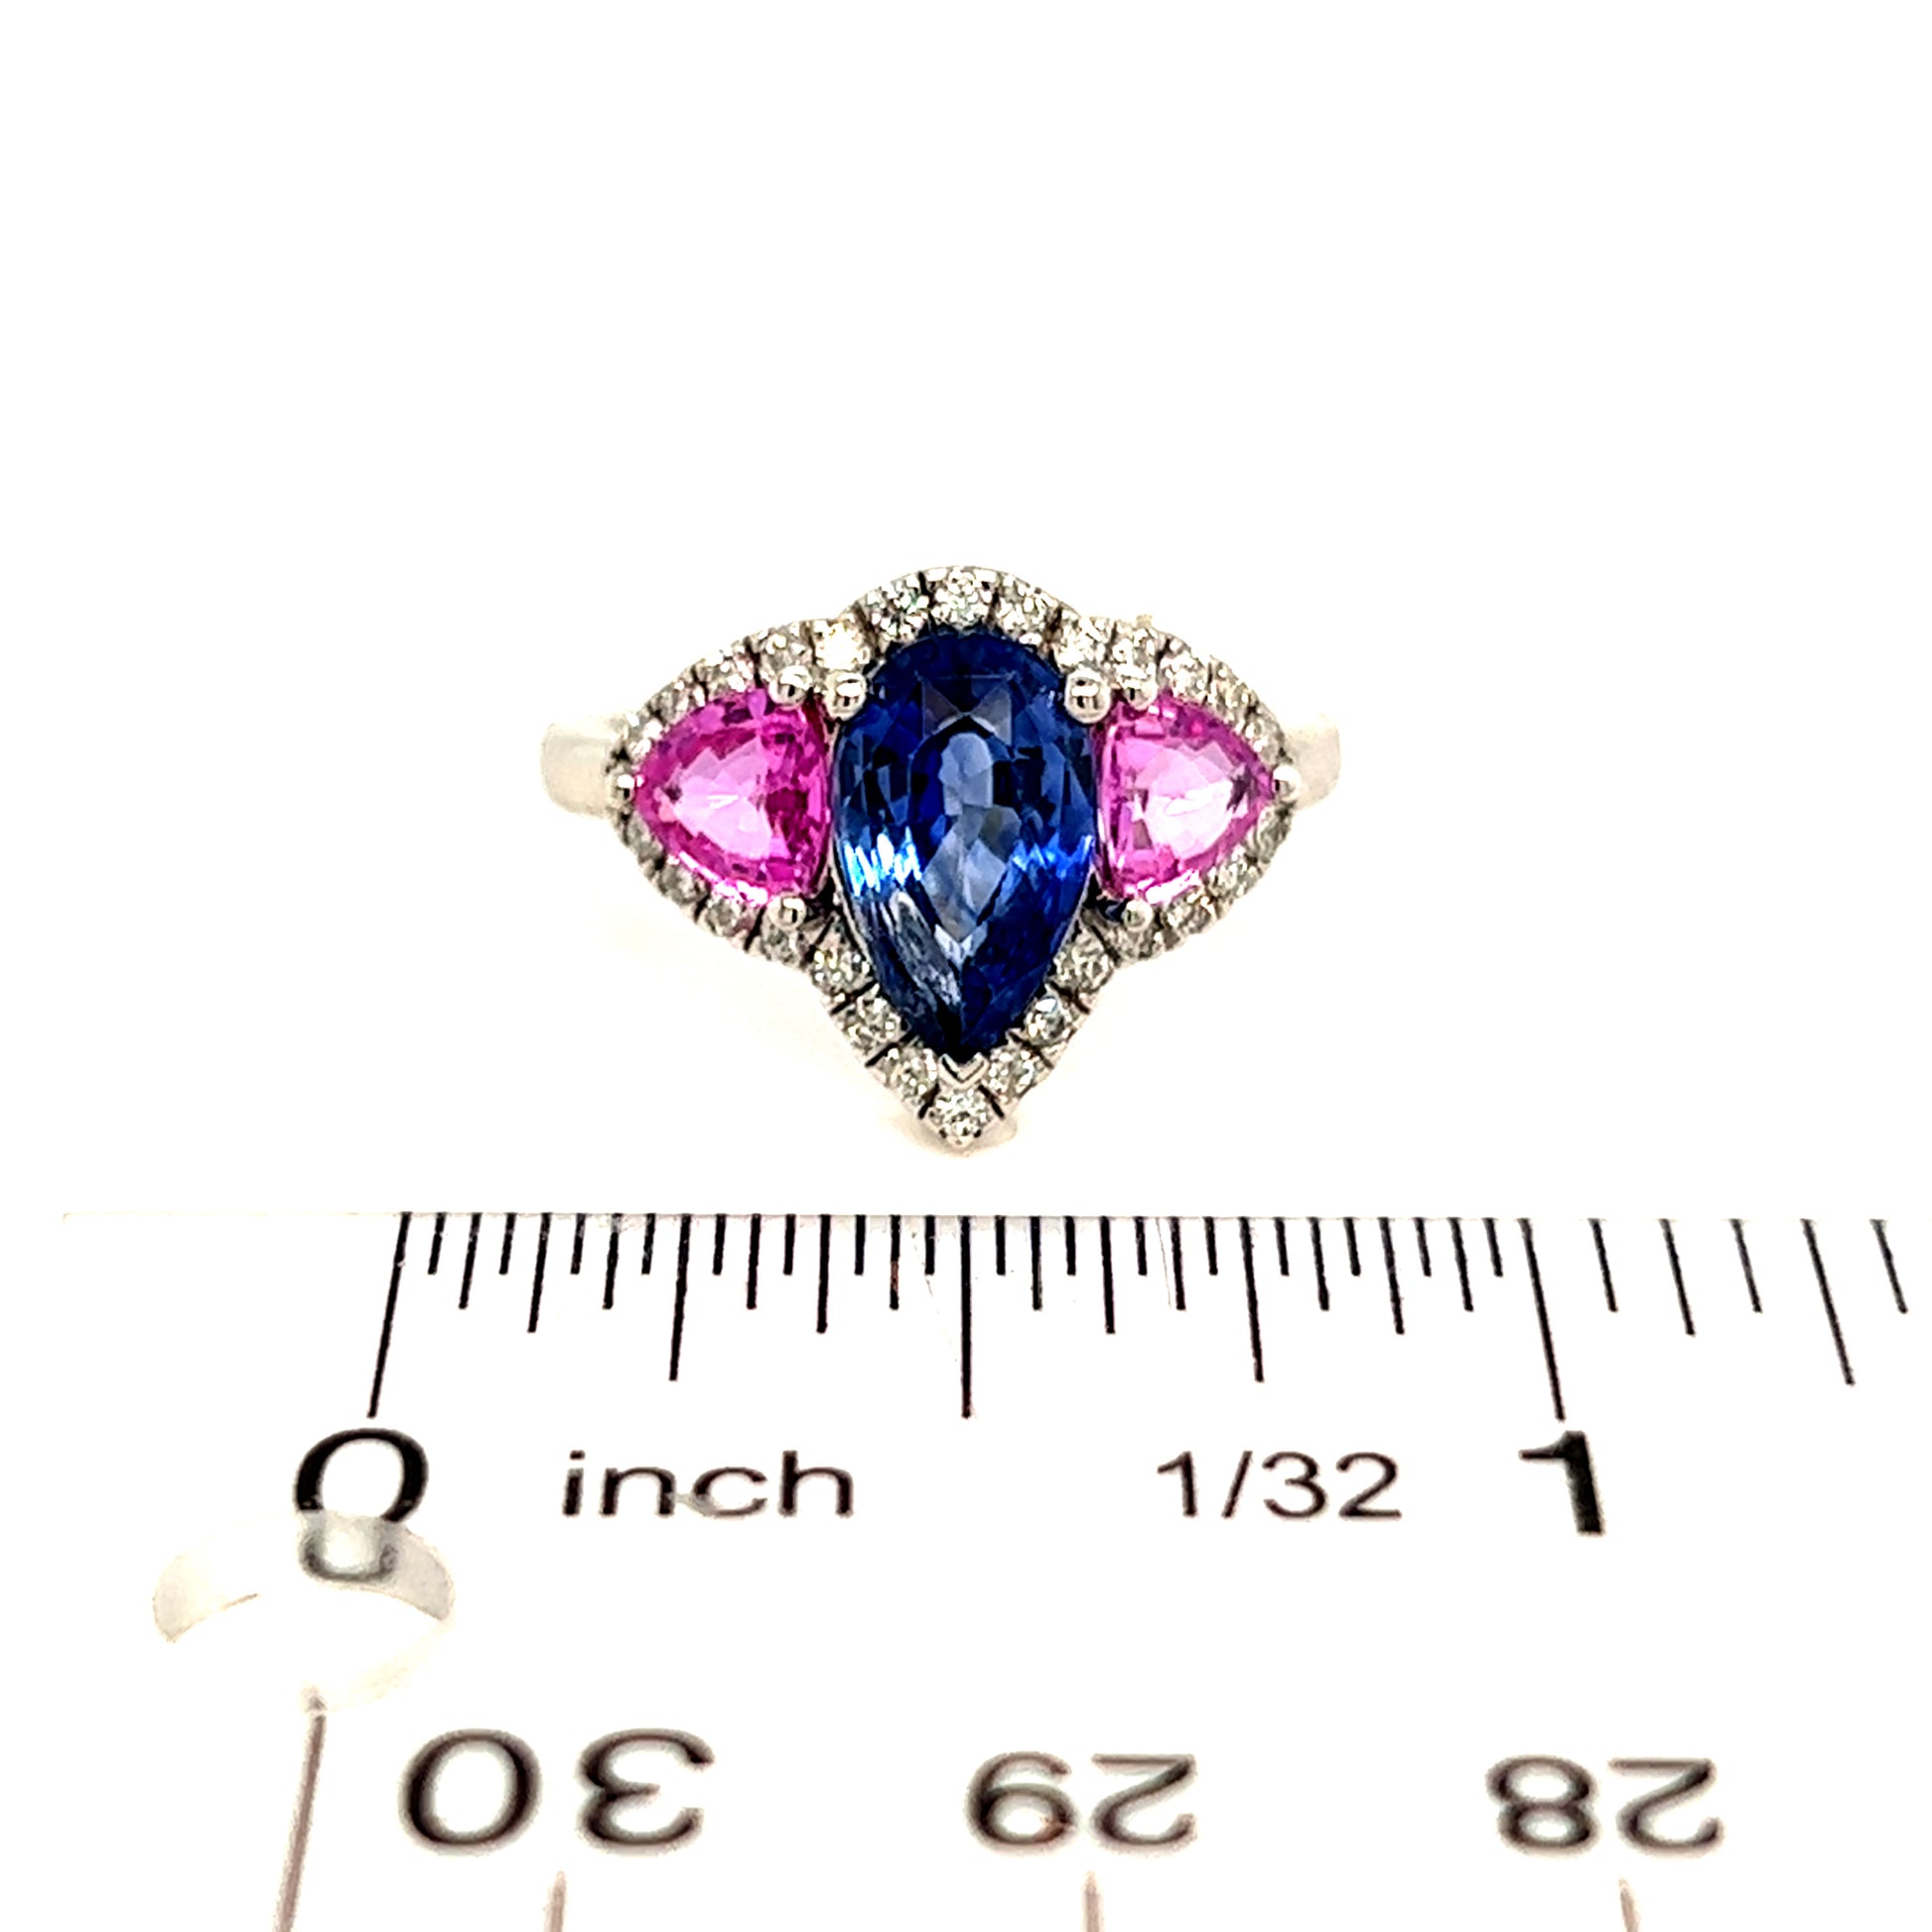 Natural Sapphire Diamond Ring Size 6.5 14k Gold 3.43 TCW Certified $7,950 215419 - Certified Estate Jewelry